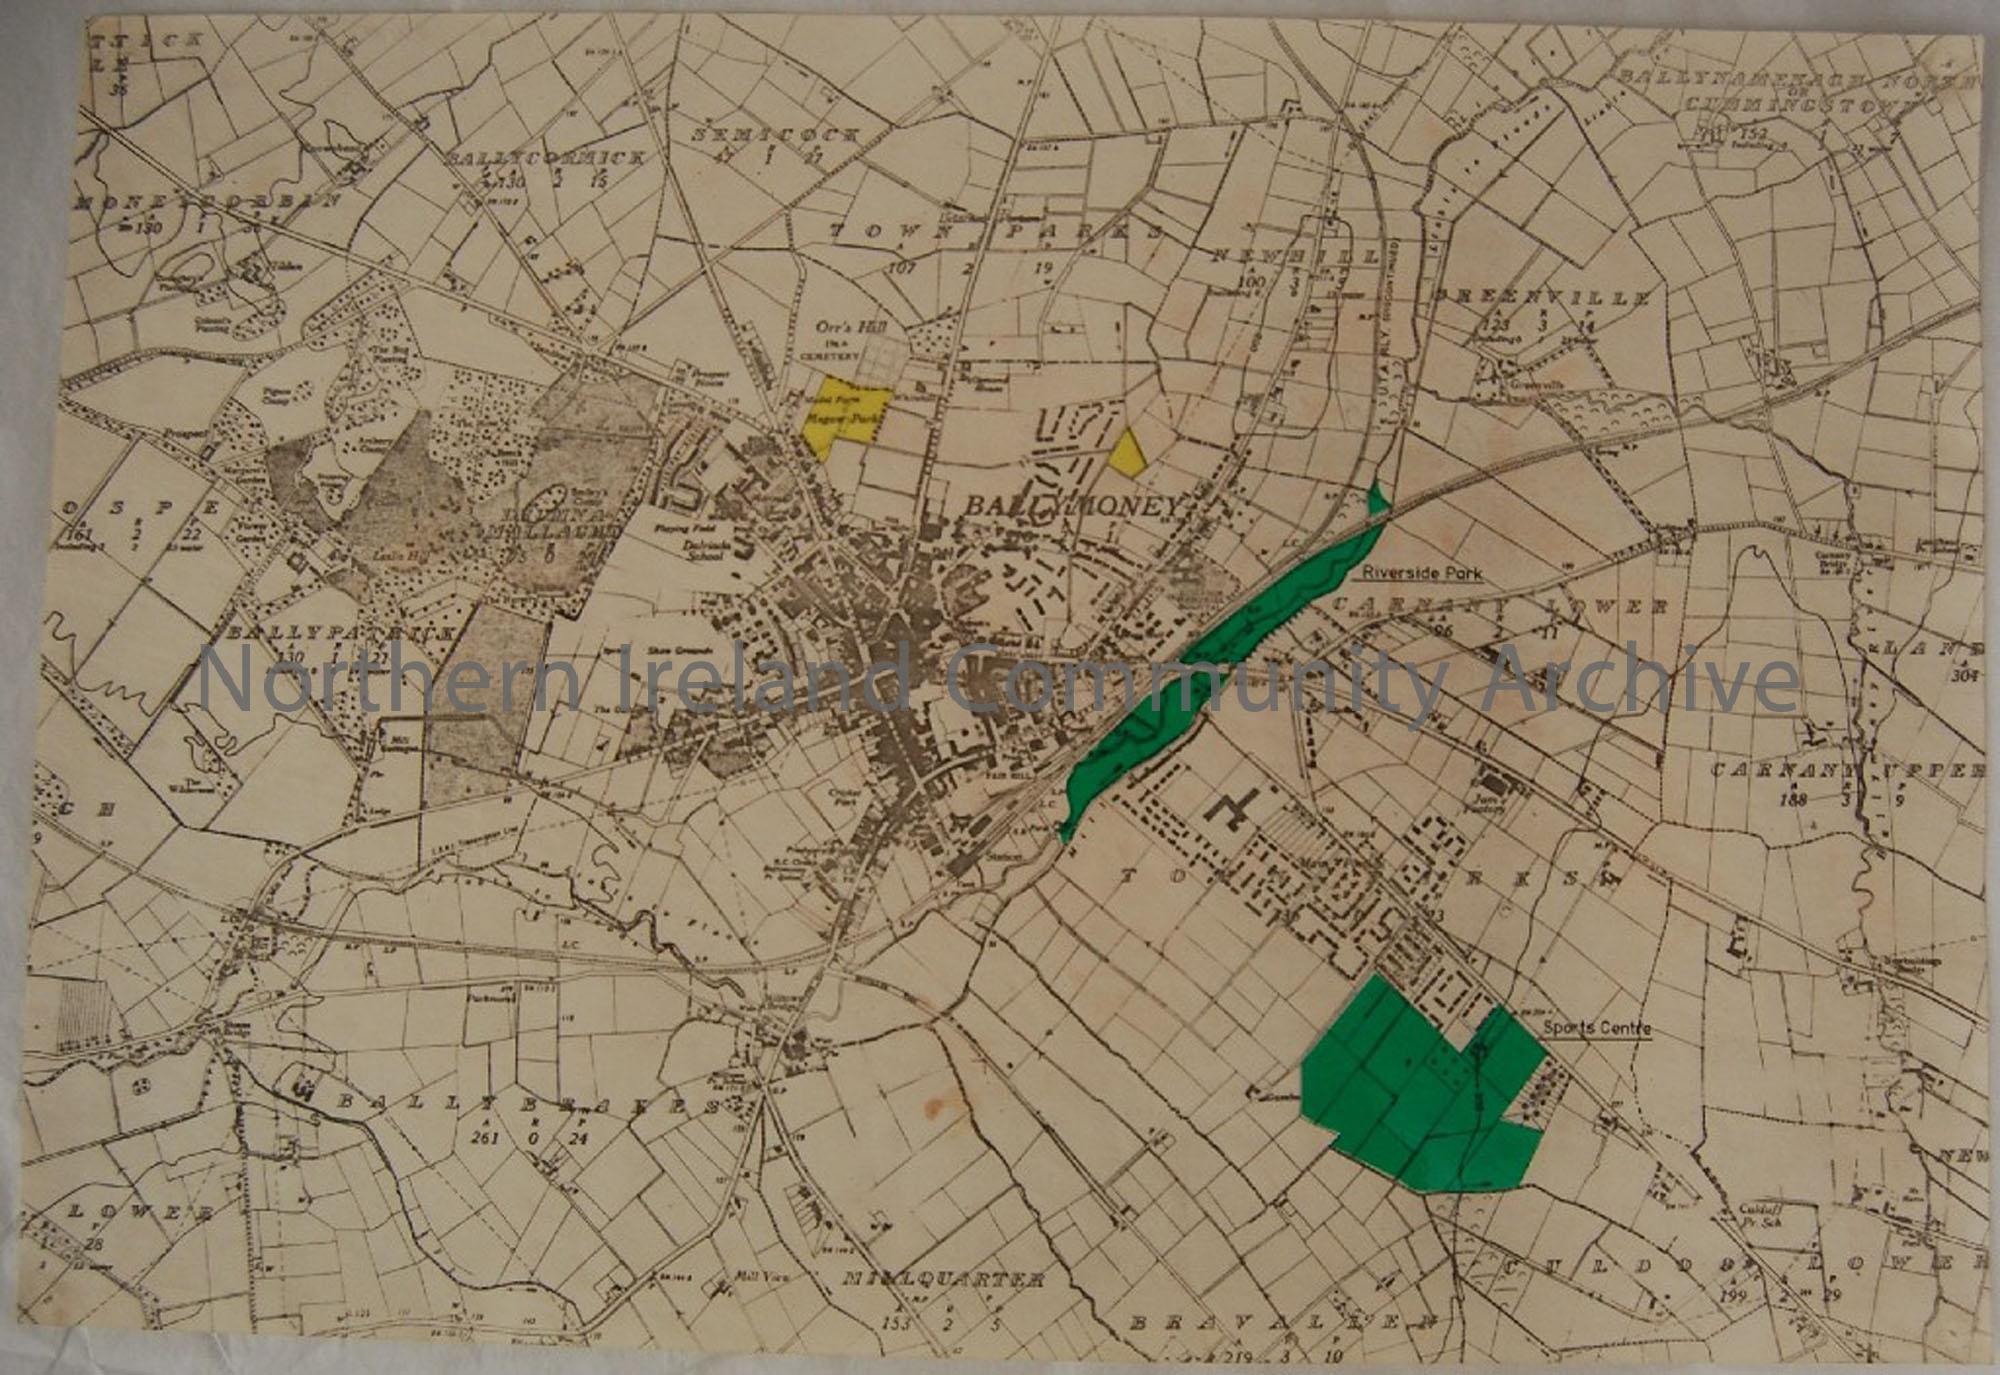 Map showing location of Riverside Pk and Sports Centre. Map has plastic coating to highlight, in green, Riverside Pk and Sports Centre, in yellow Mega…